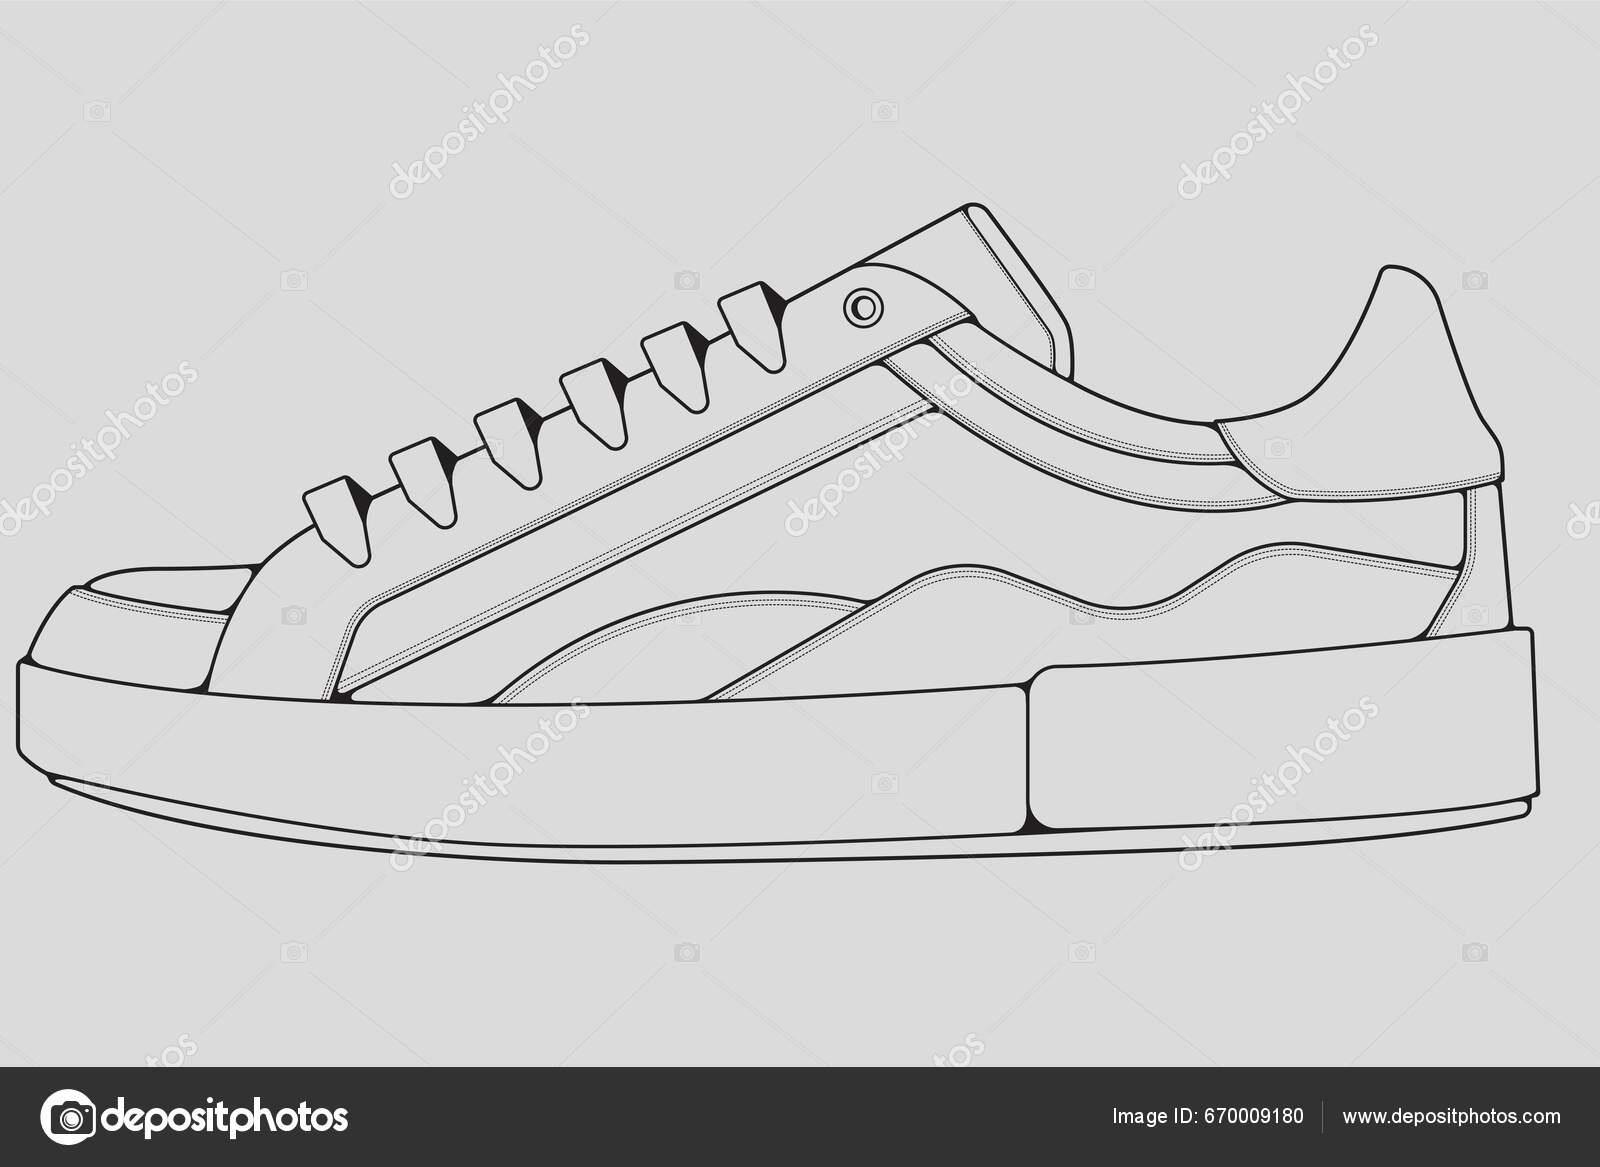 Illustration of a spaceship in a nike sneaker on Craiyon